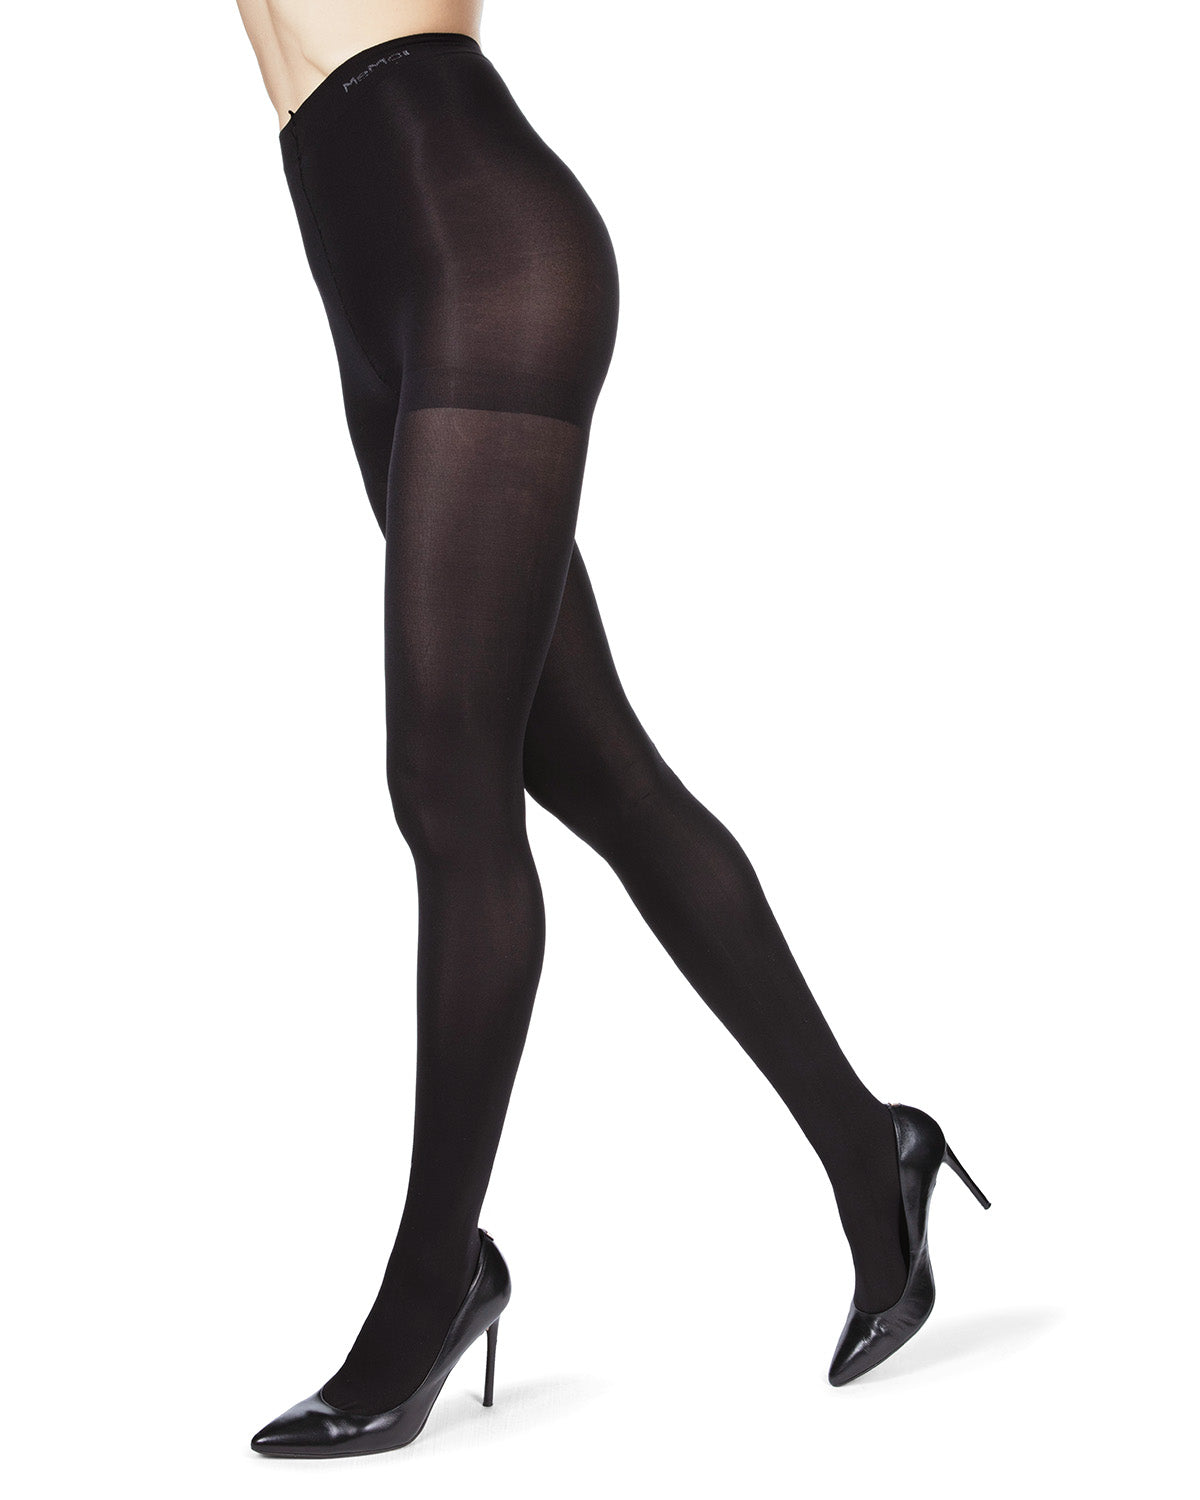 CALZITALY 100 DEN OPAQUE MEDIUM SUPPORT TIGHTS, FACTOR 8 SUPPORT AND SHAPER  PANTYHOSE, S, M, L, XL, BLACK, ITALIAN HOSIERY